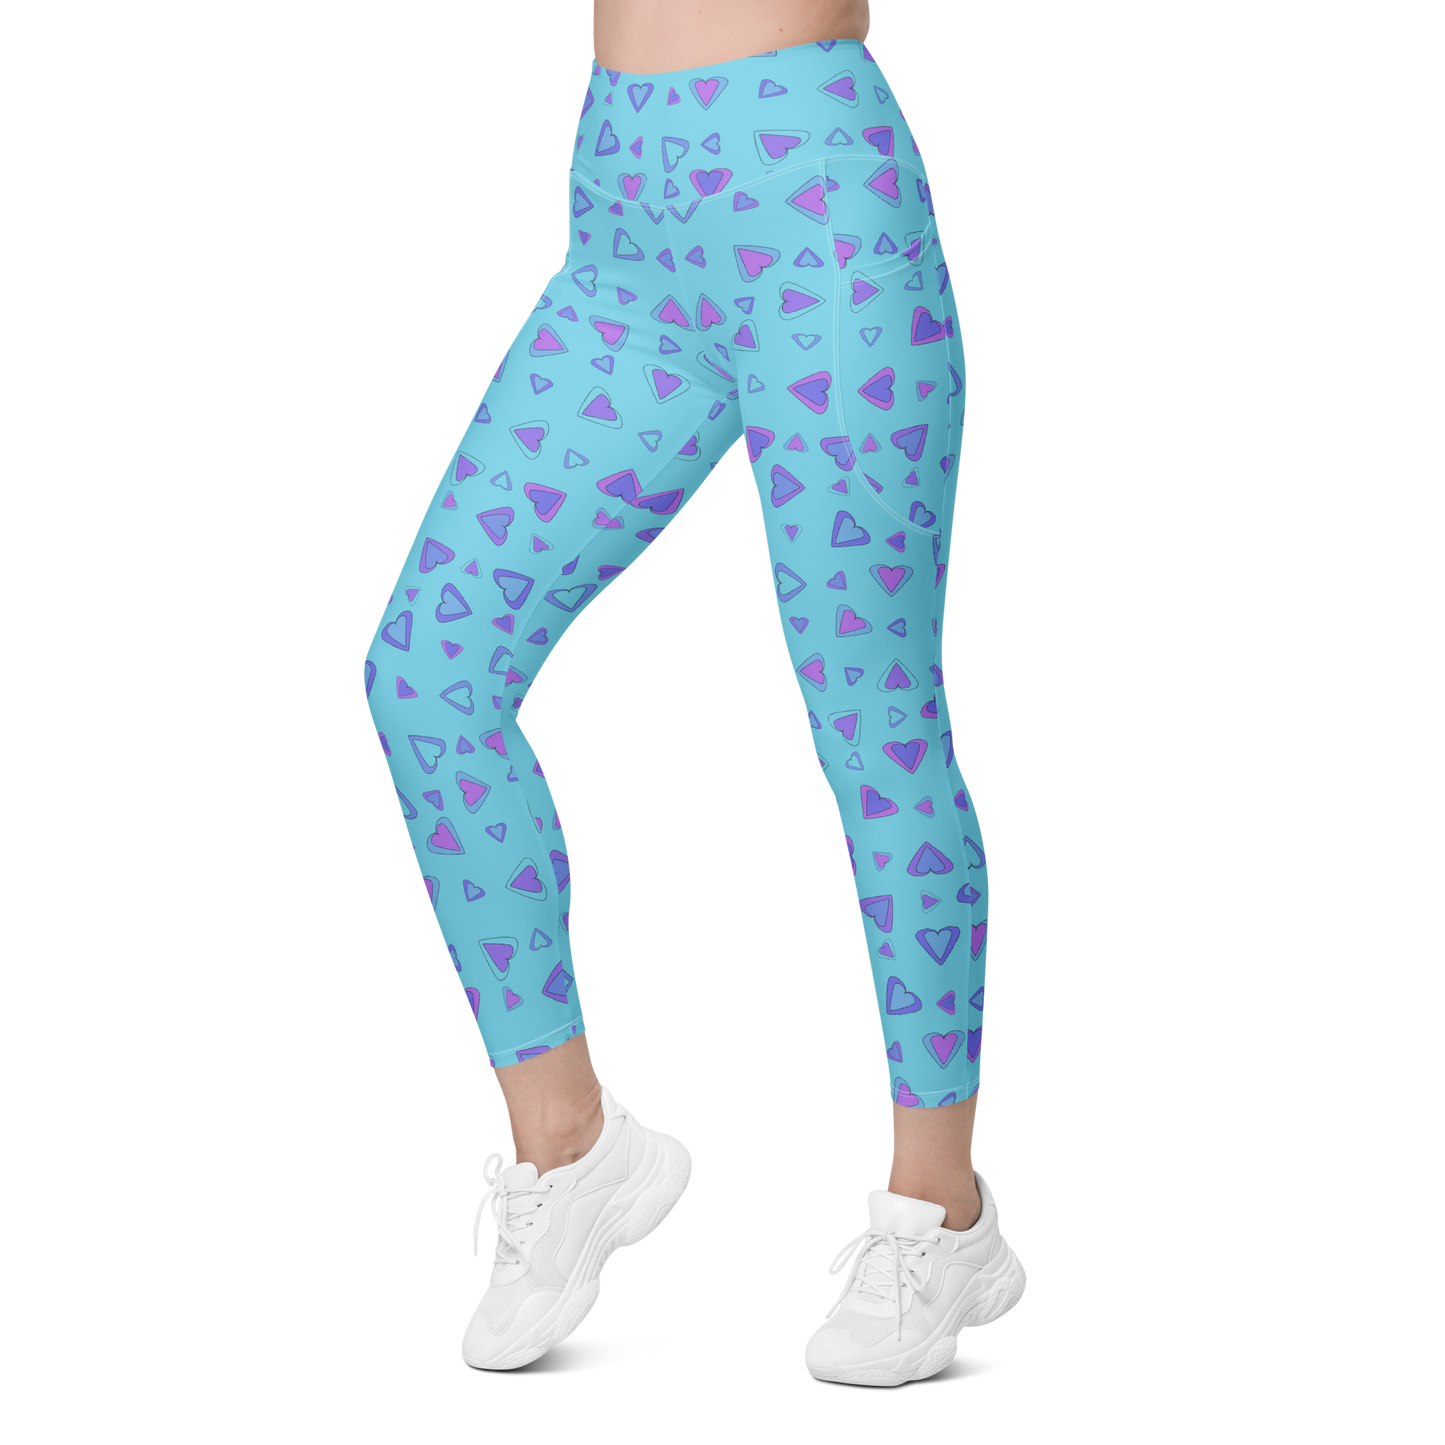 Rainbow Of Hearts | Batch 01 | Seamless Patterns | All-Over Print Leggings with Pockets - #9